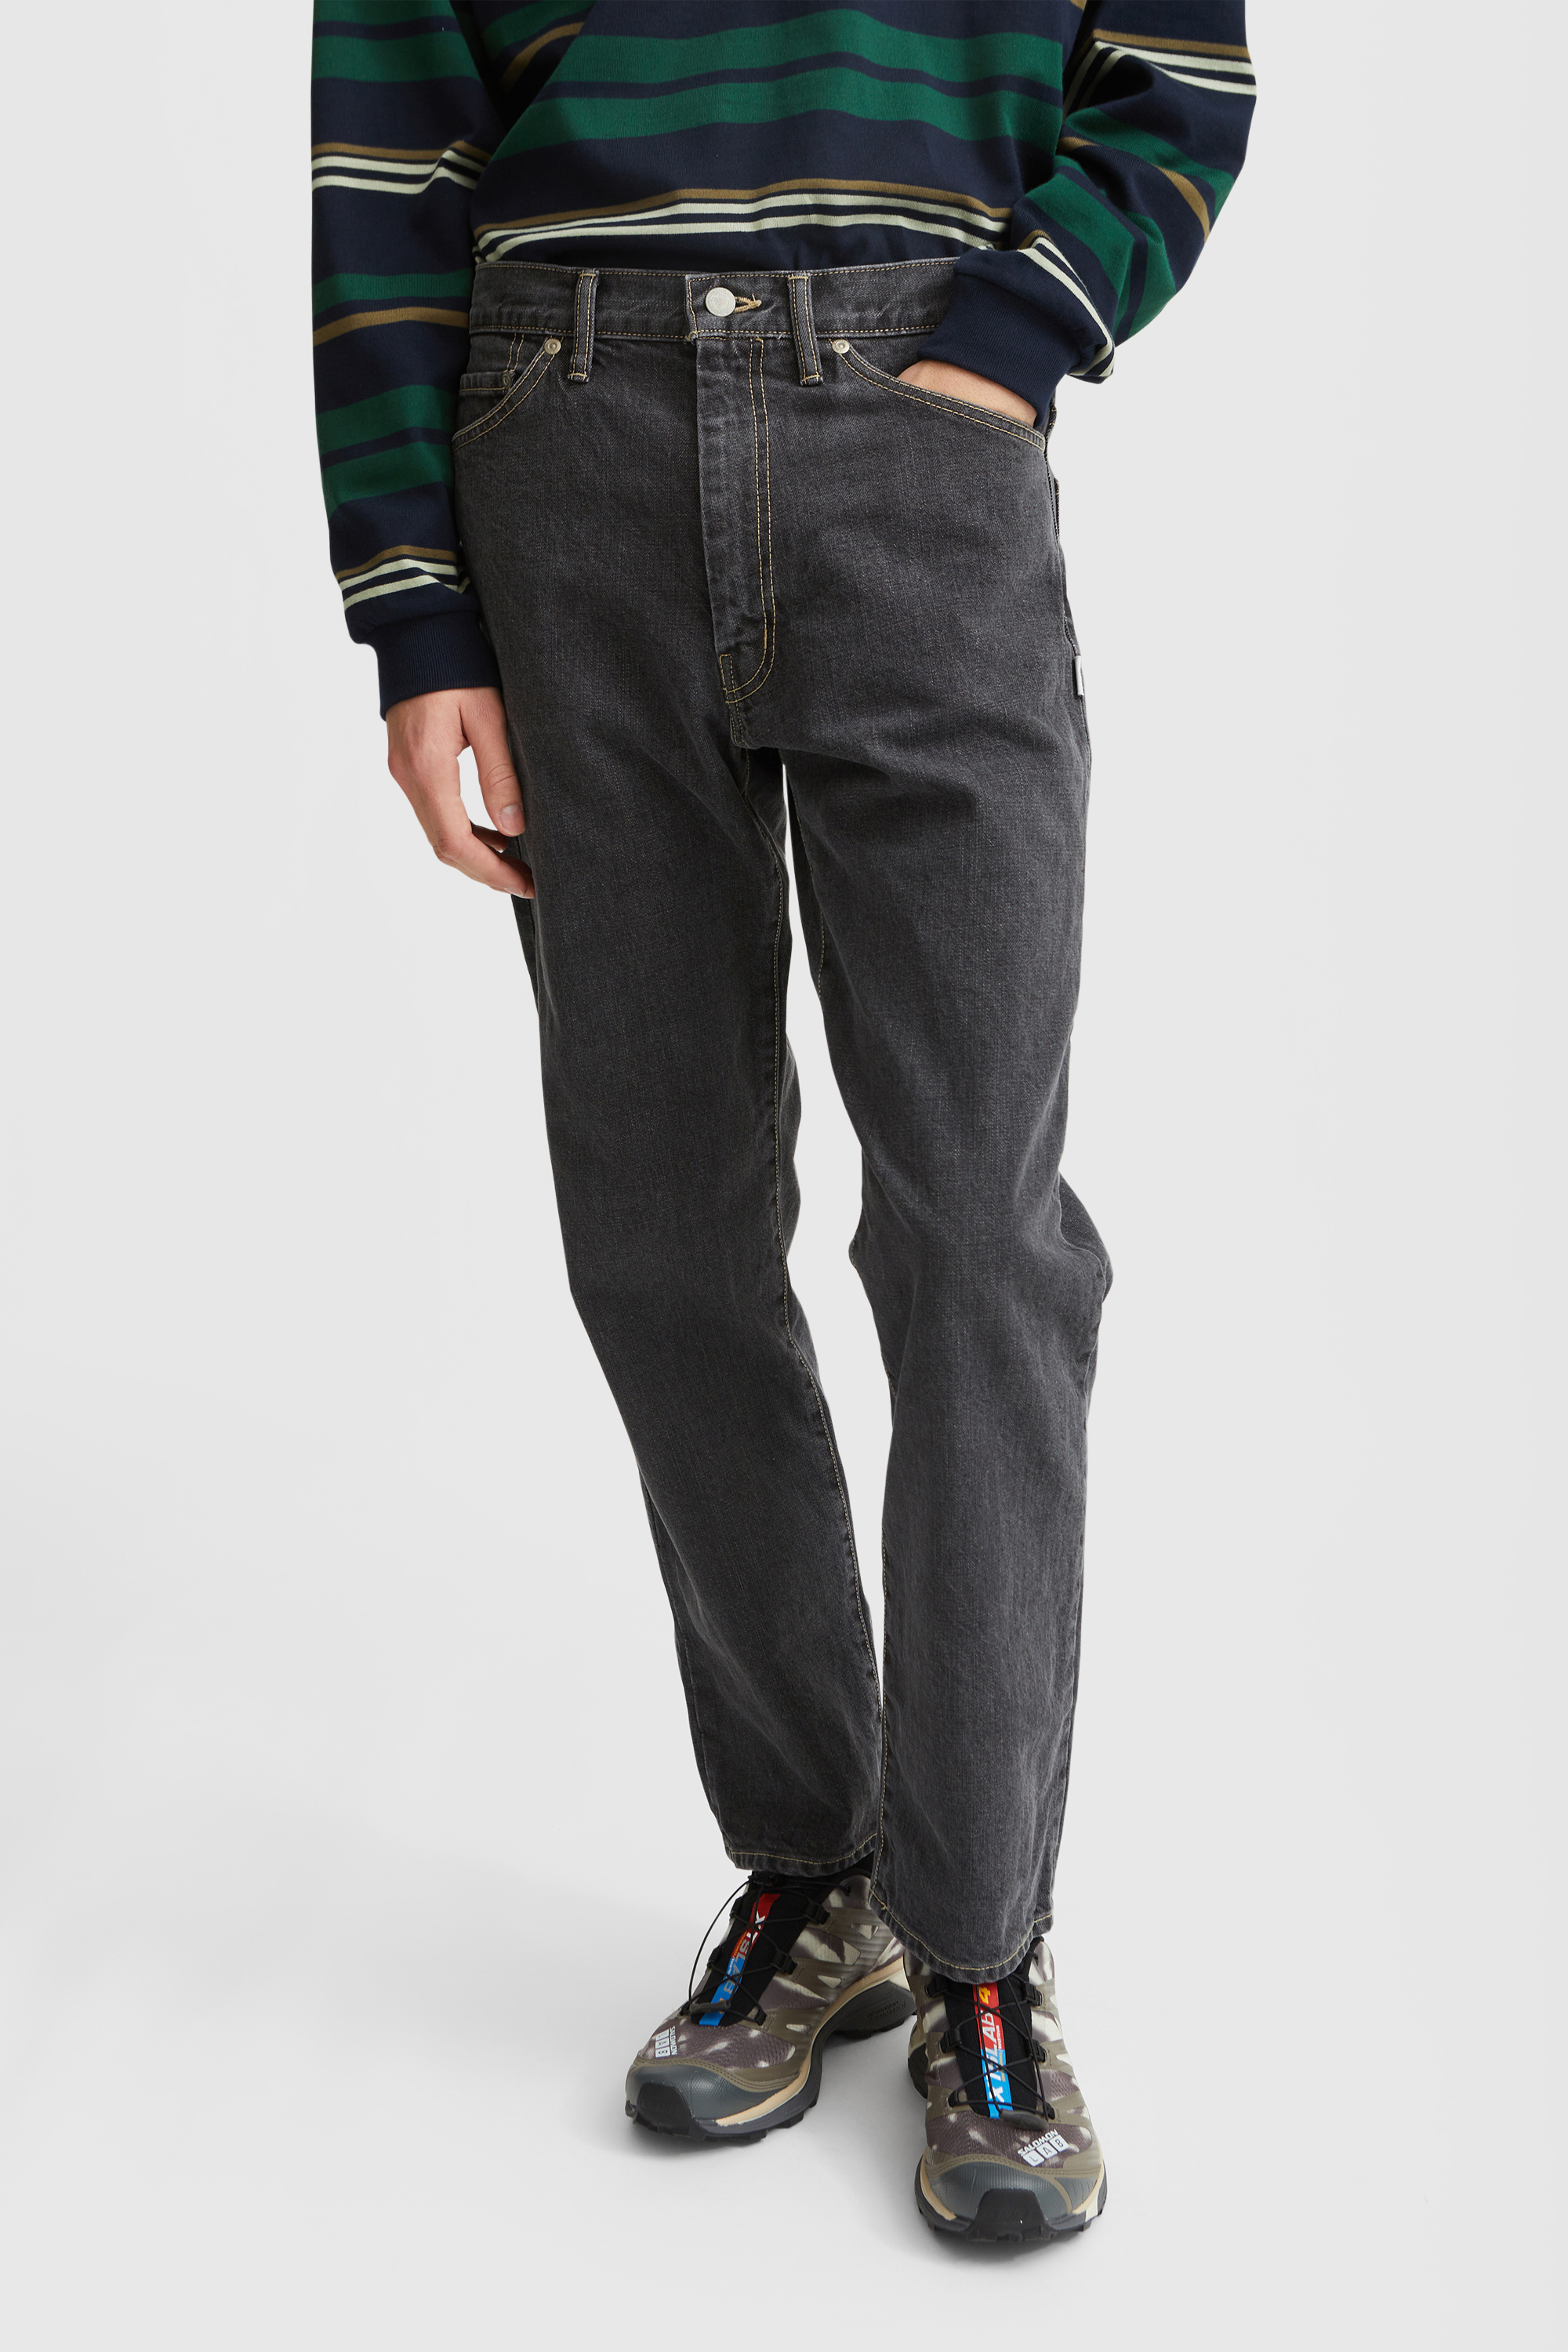 Sサイズ WTAPS 20AW BLUES BAGGY TROUSERS